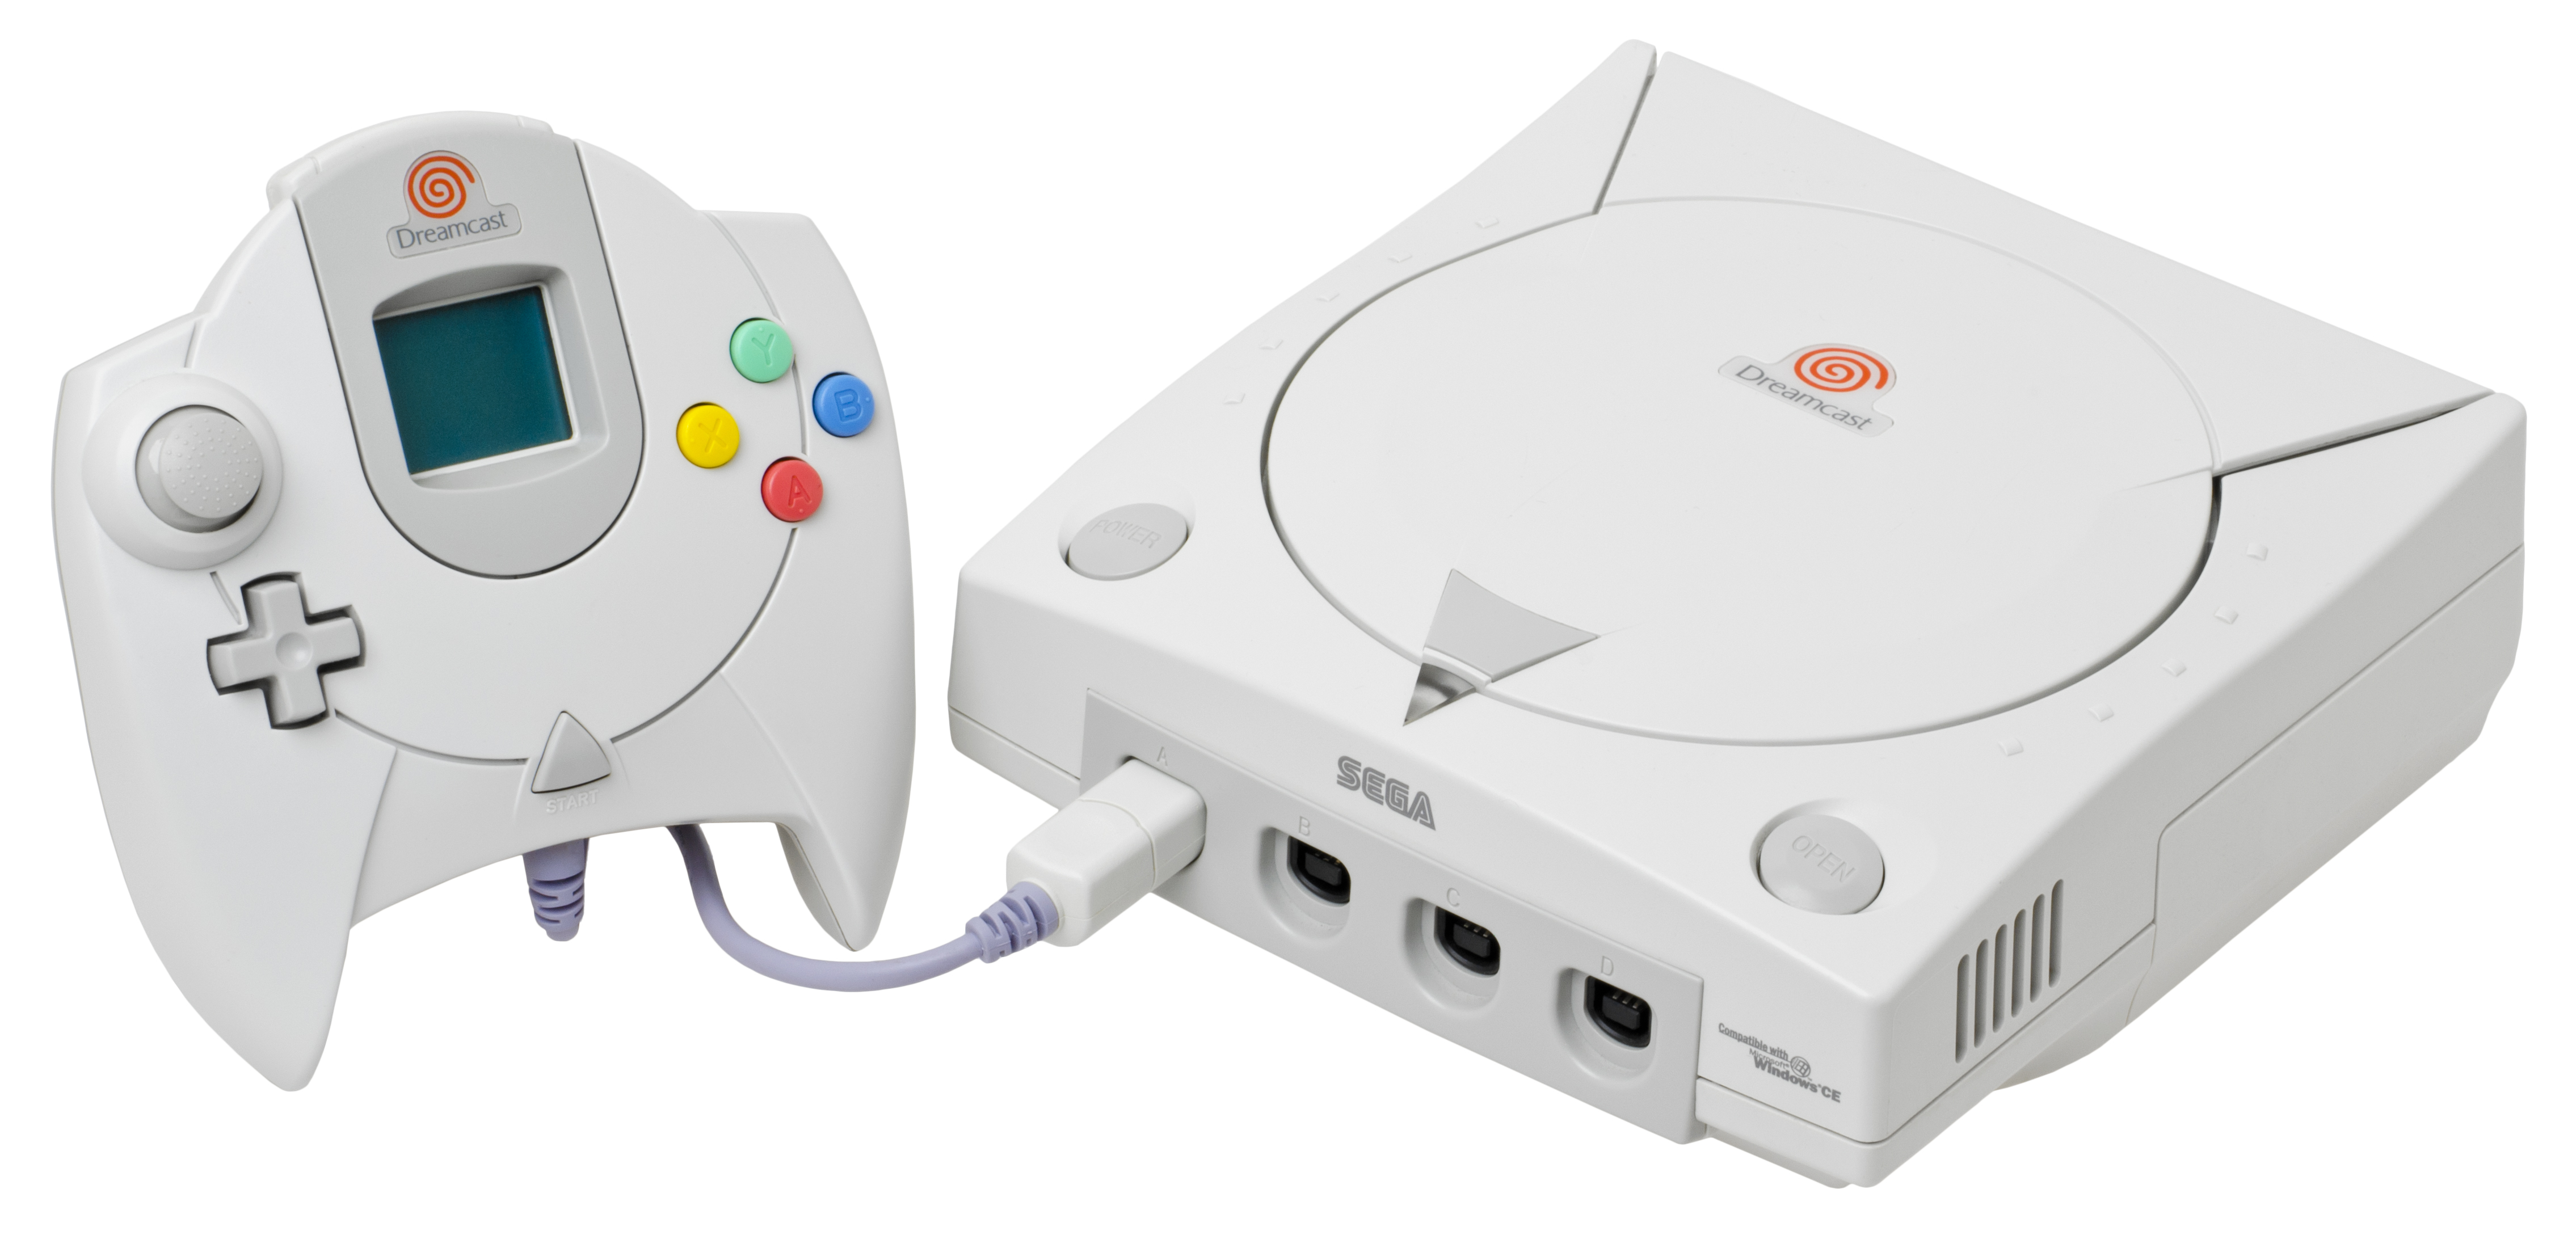 The Sega Dreamcast Changed My Life